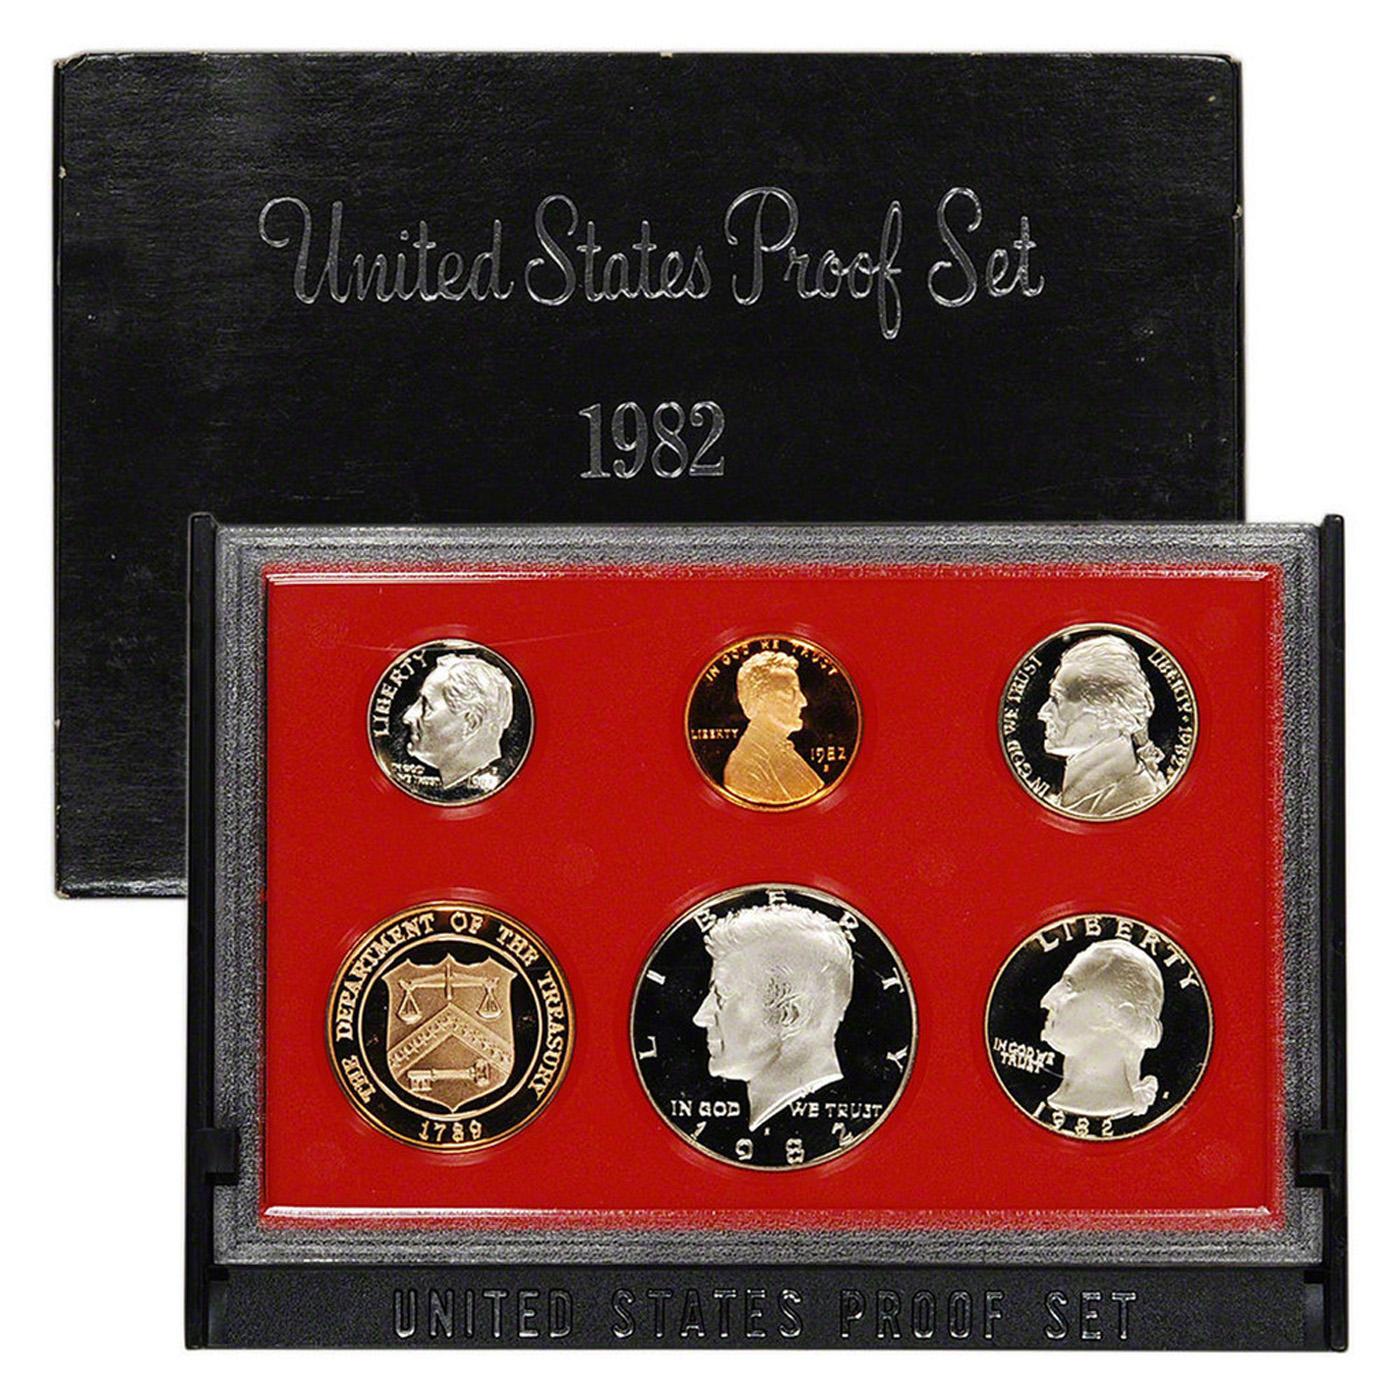 Group of 2 United States Mint Proof Sets 1982-1983 10 coins